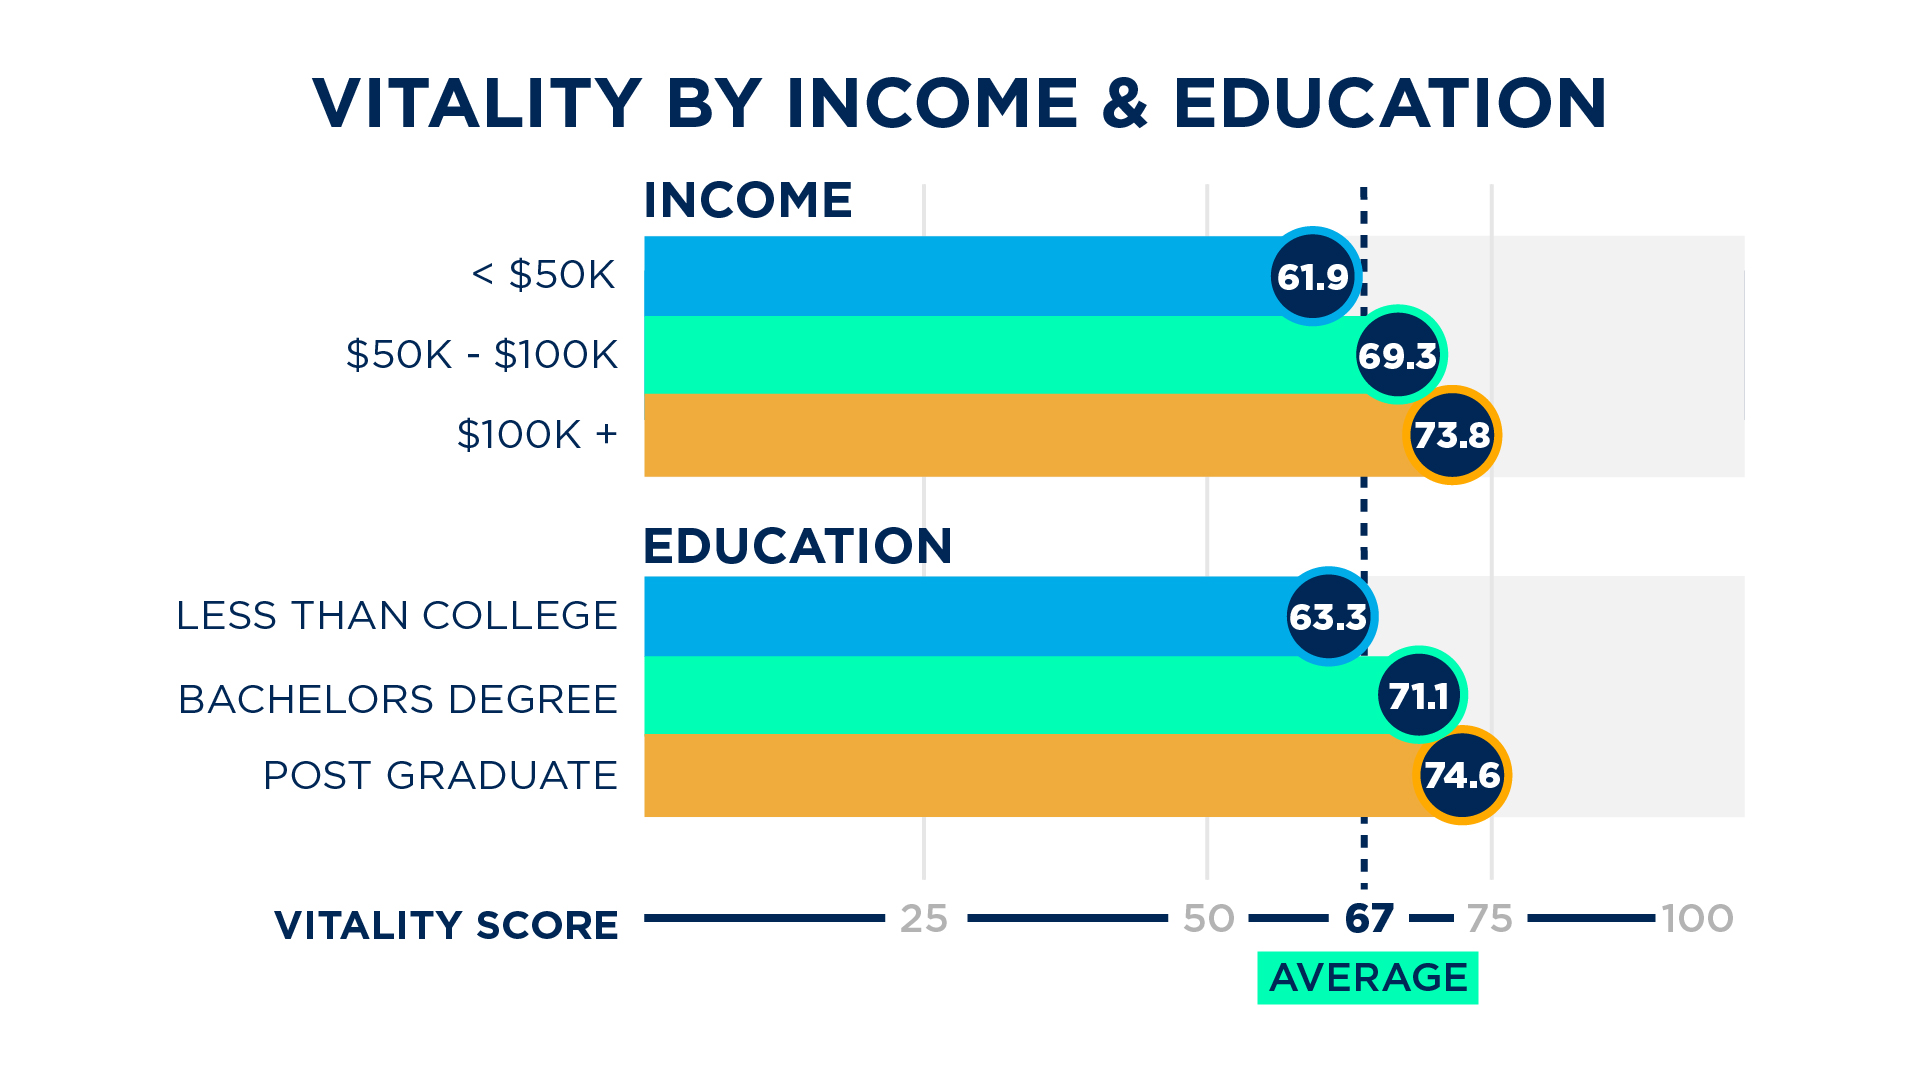 Vitality by income and education